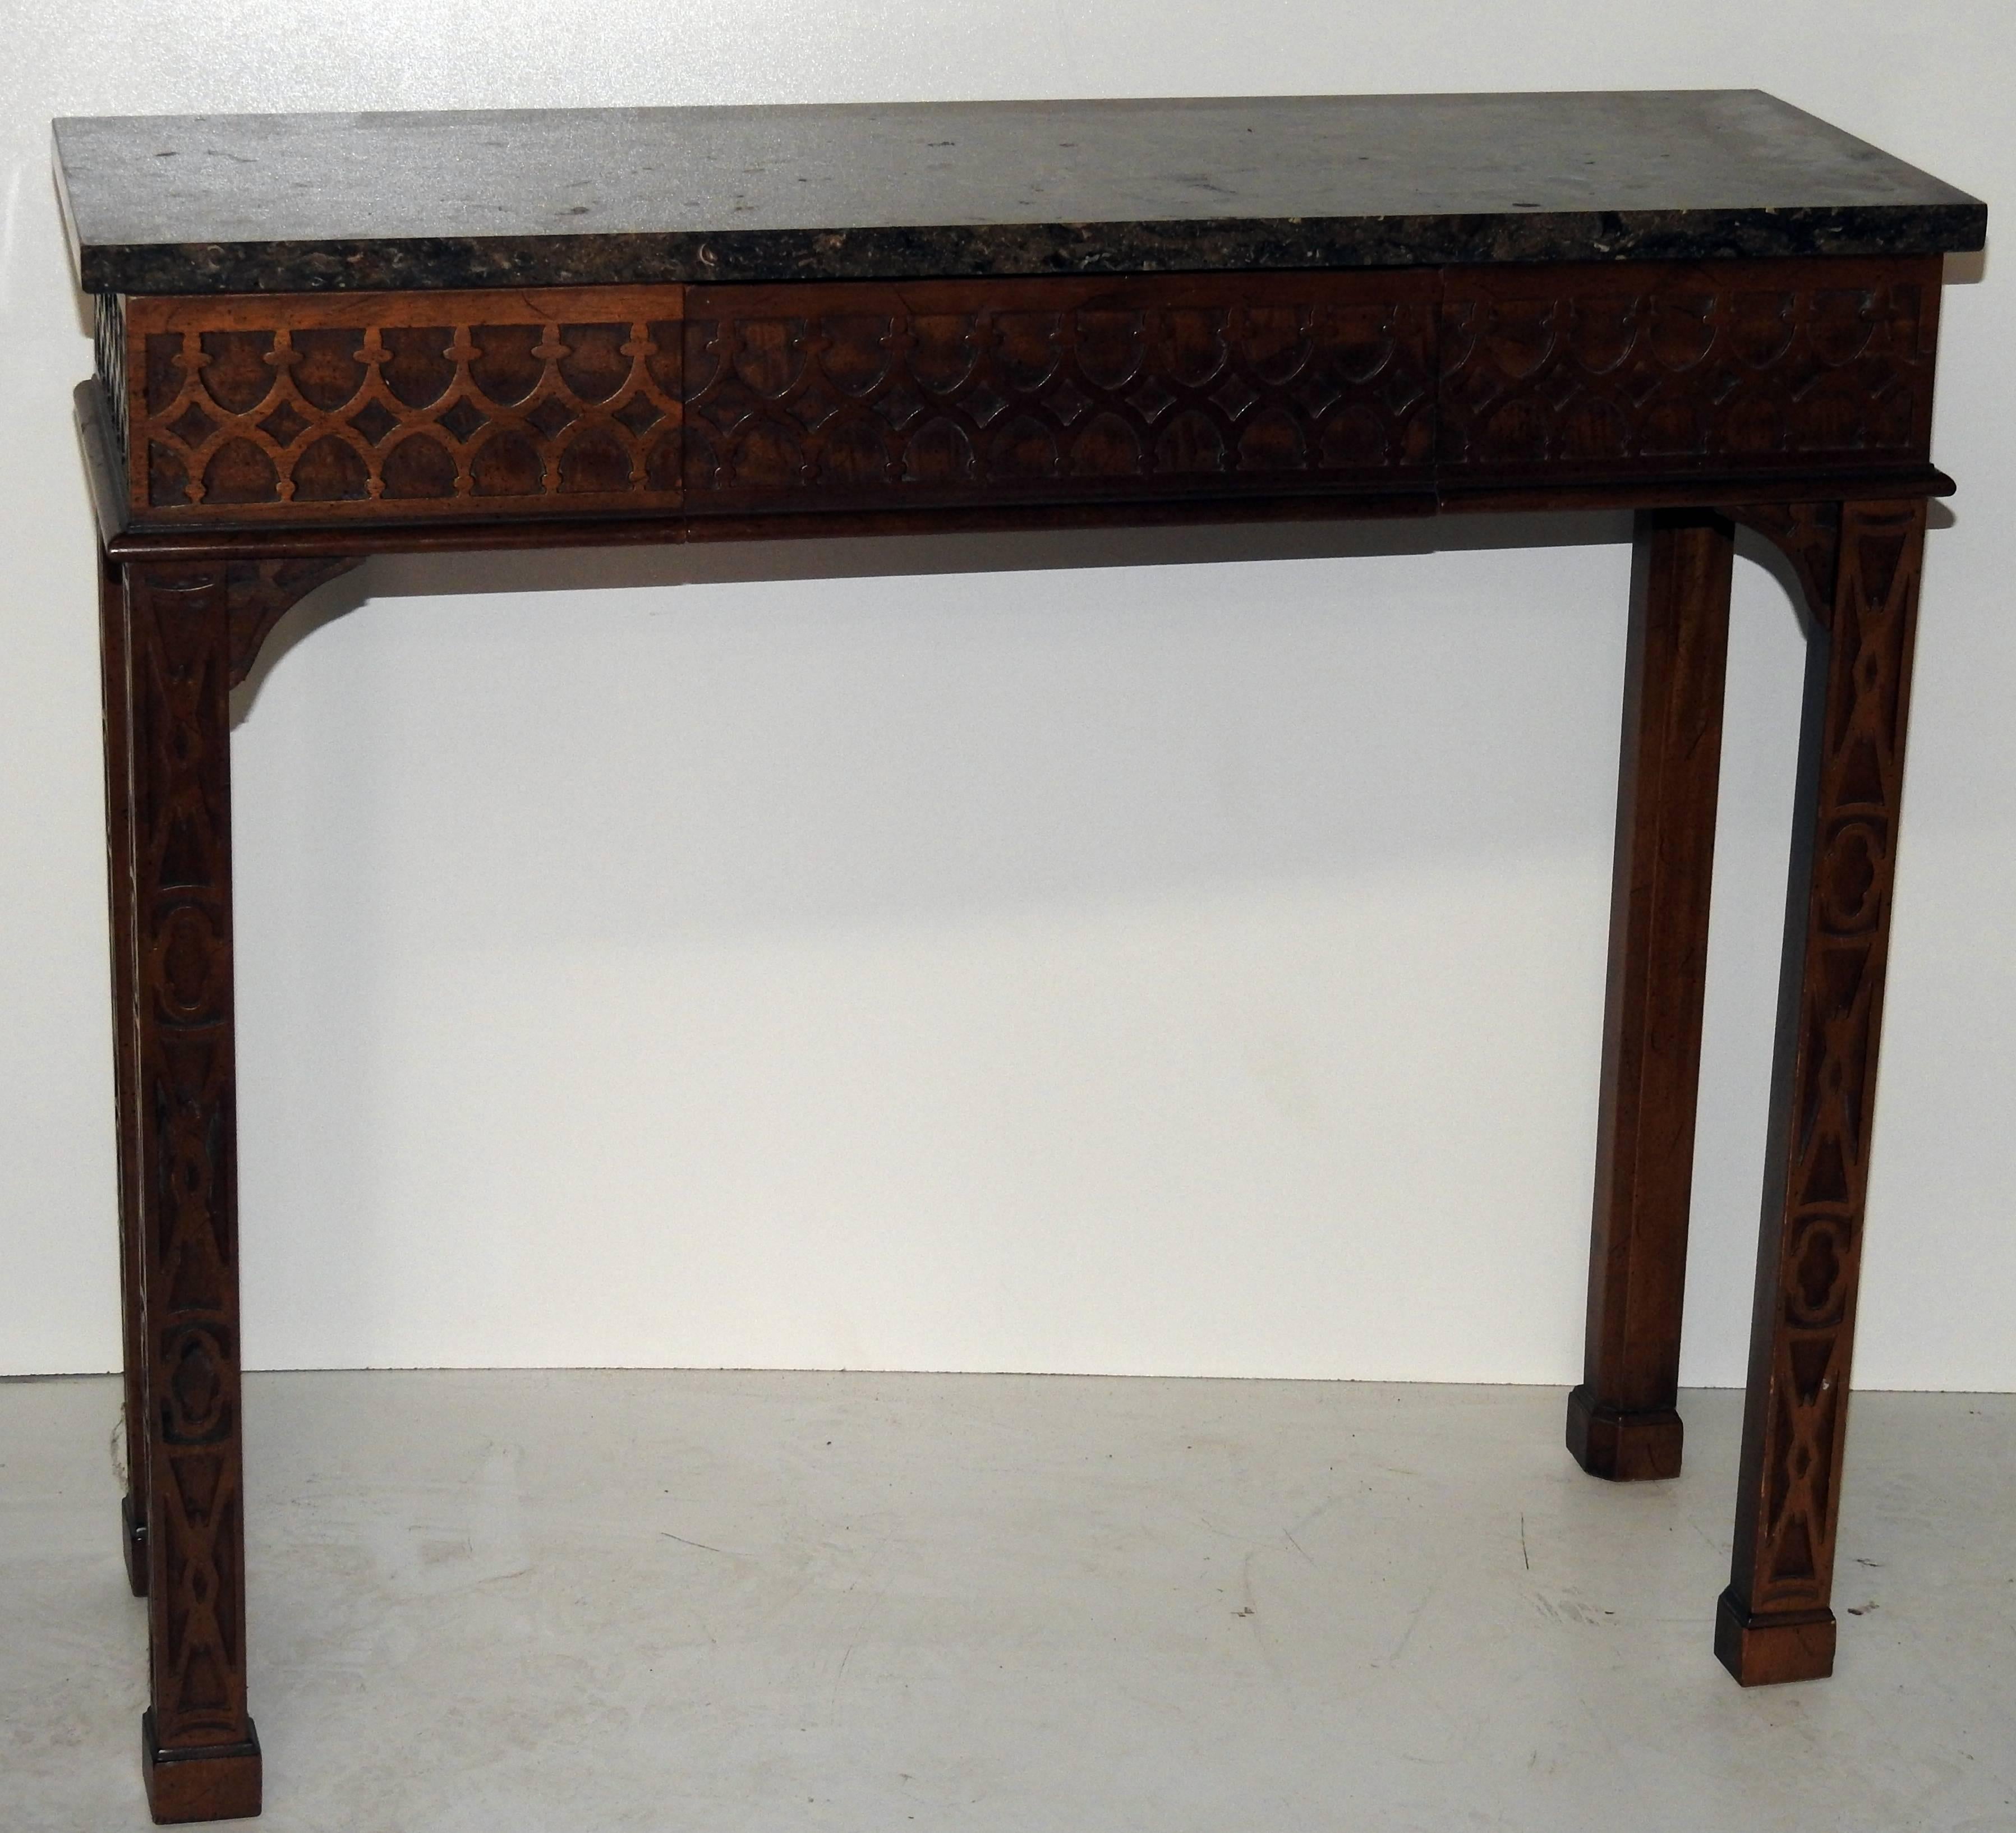 Wallace Nutting by Drexel walnut console table with a granite top.